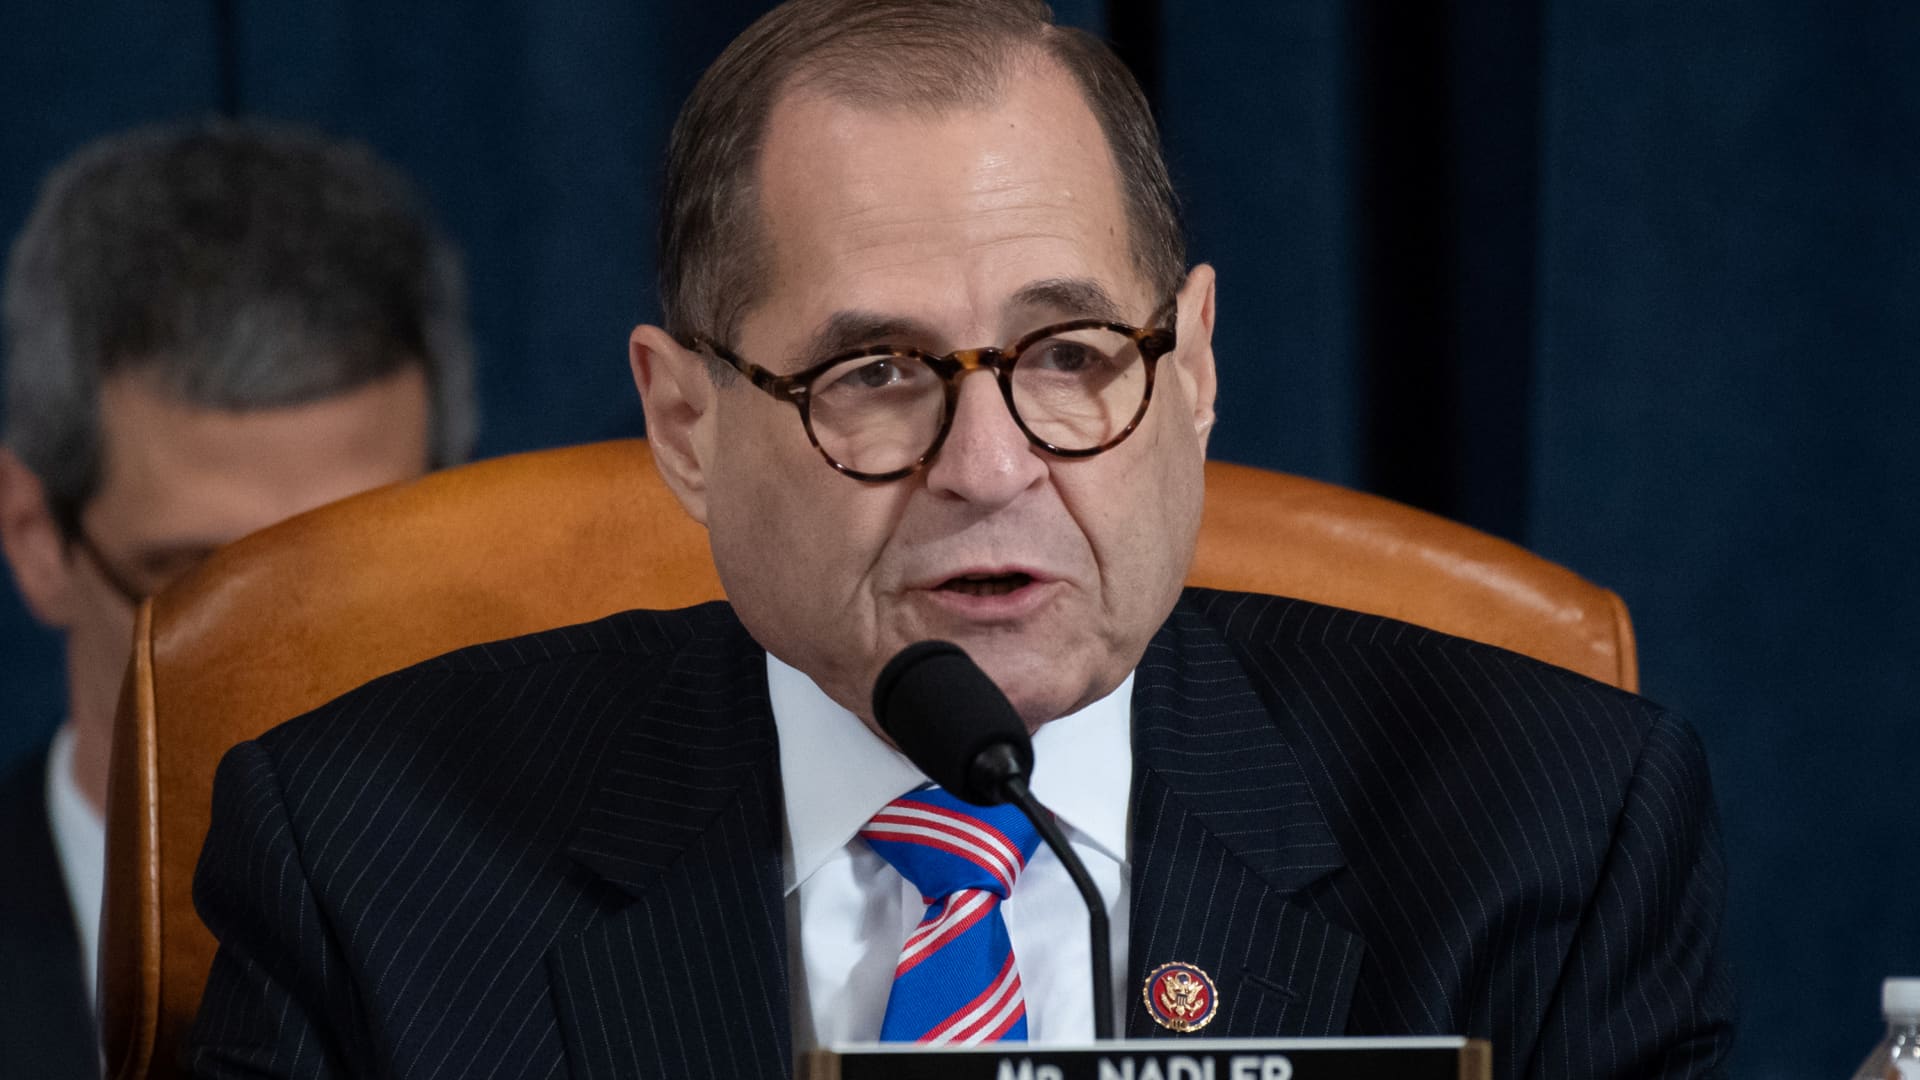 House Judiciary Committee Chairman Jerrold Nadler (D-NY) speaks during a House Judiciary Committee hearing on the impeachment Inquiry into U.S. President Donald Trump on Capitol Hill in Washington, U.S., December 4, 2019.